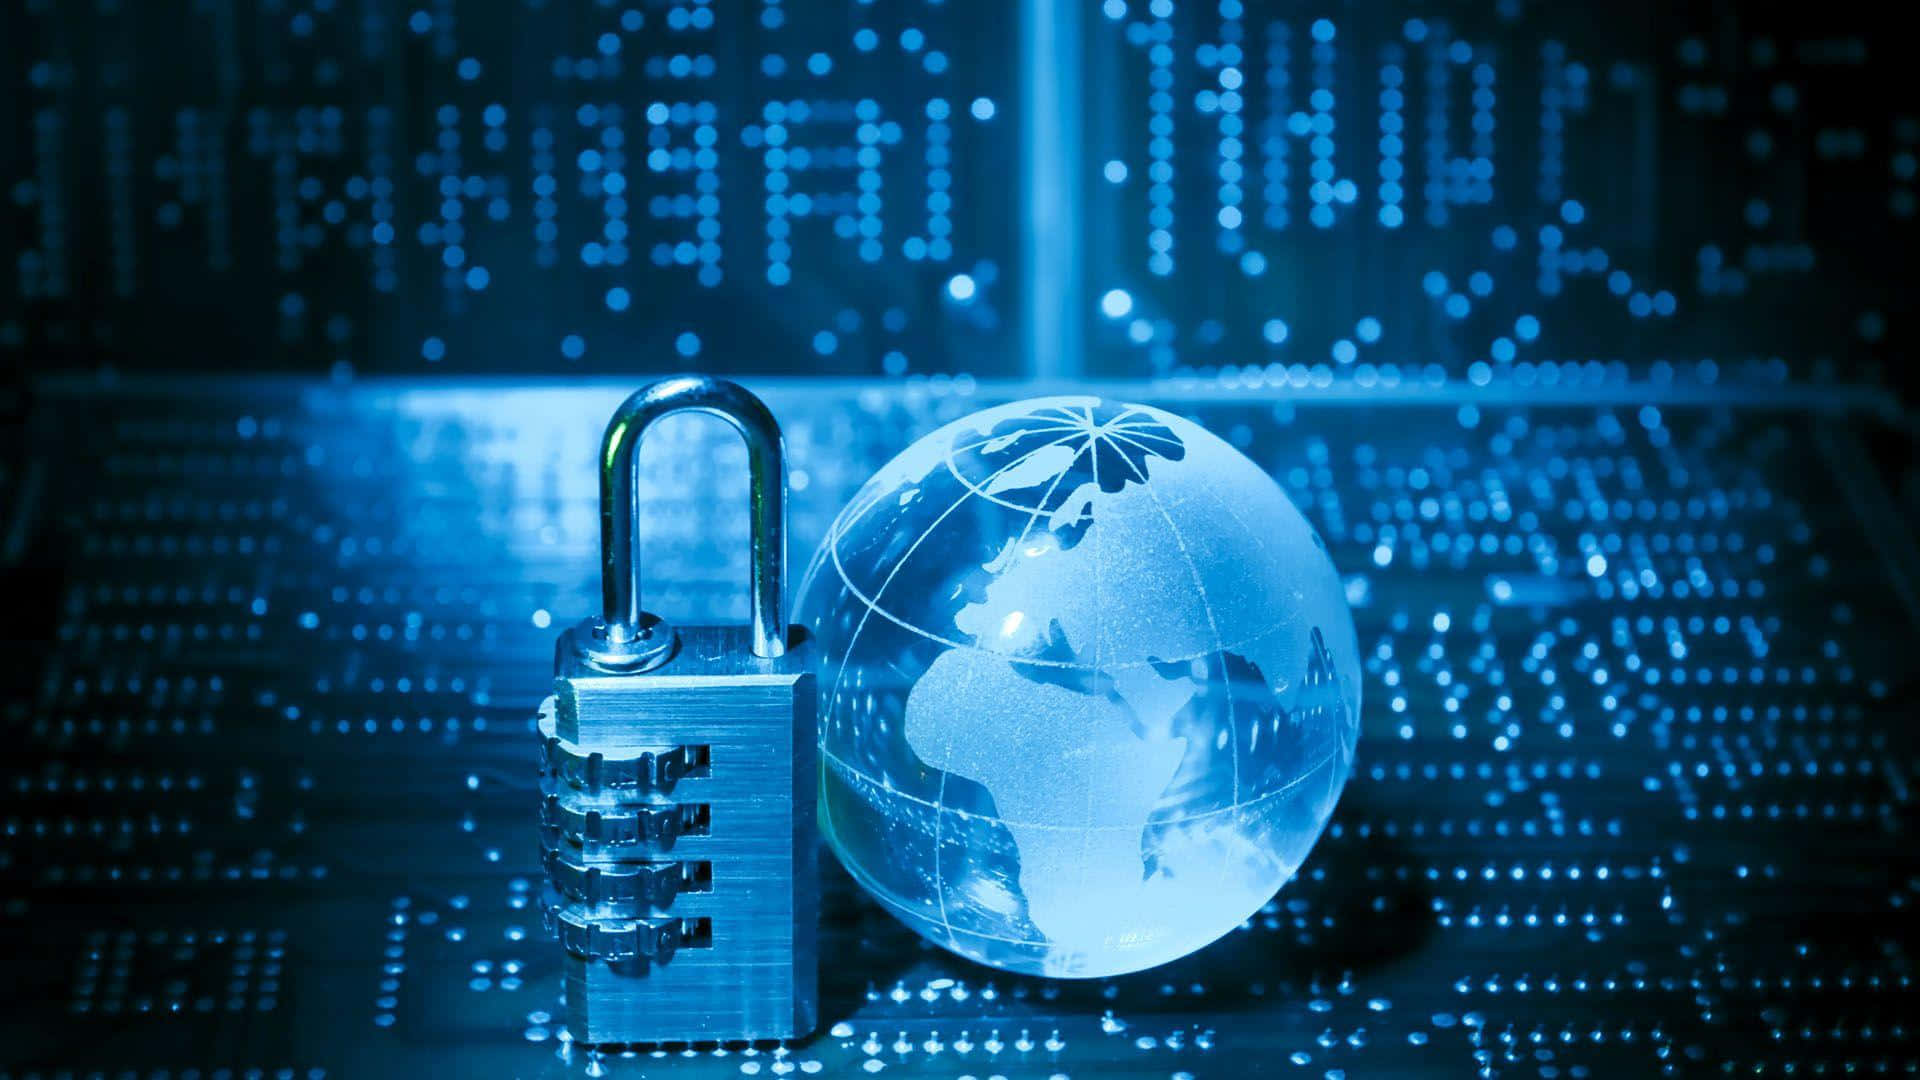 A Padlock And Globe On A Computer Screen